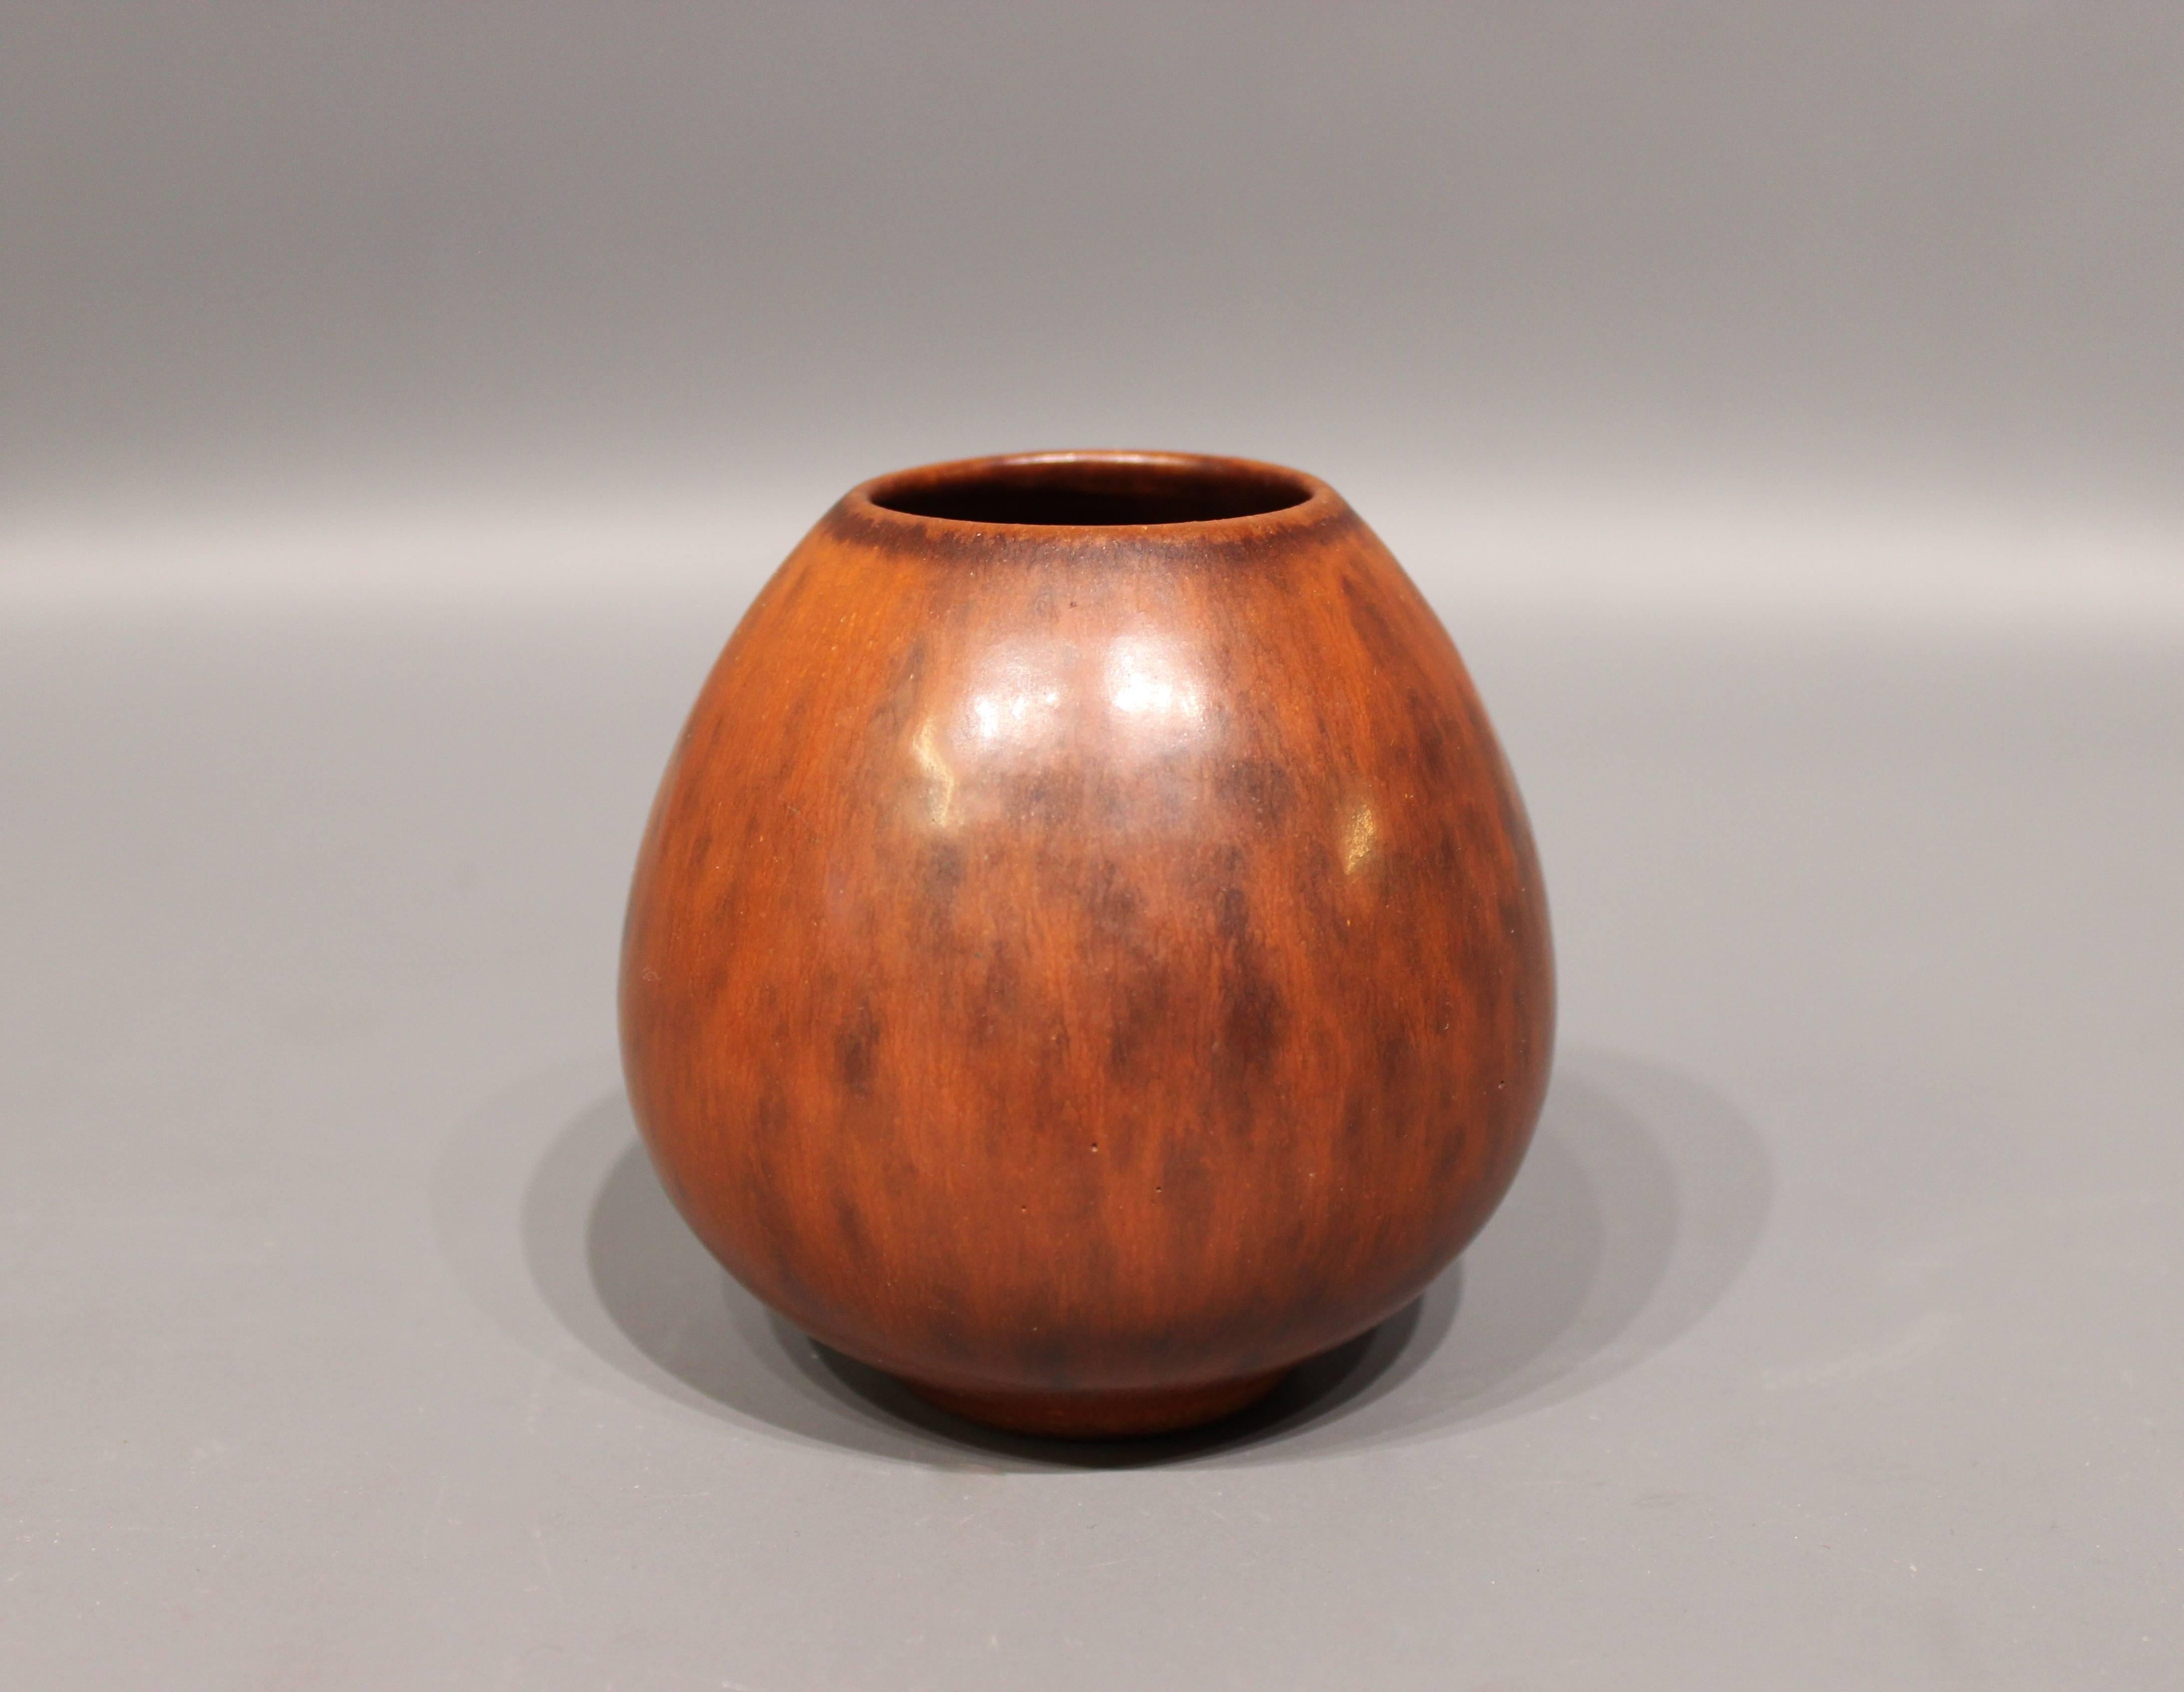 Ceramic vase with a light brown glaze, no.: 1 by Saxbo. The vase is in great vintage condition.